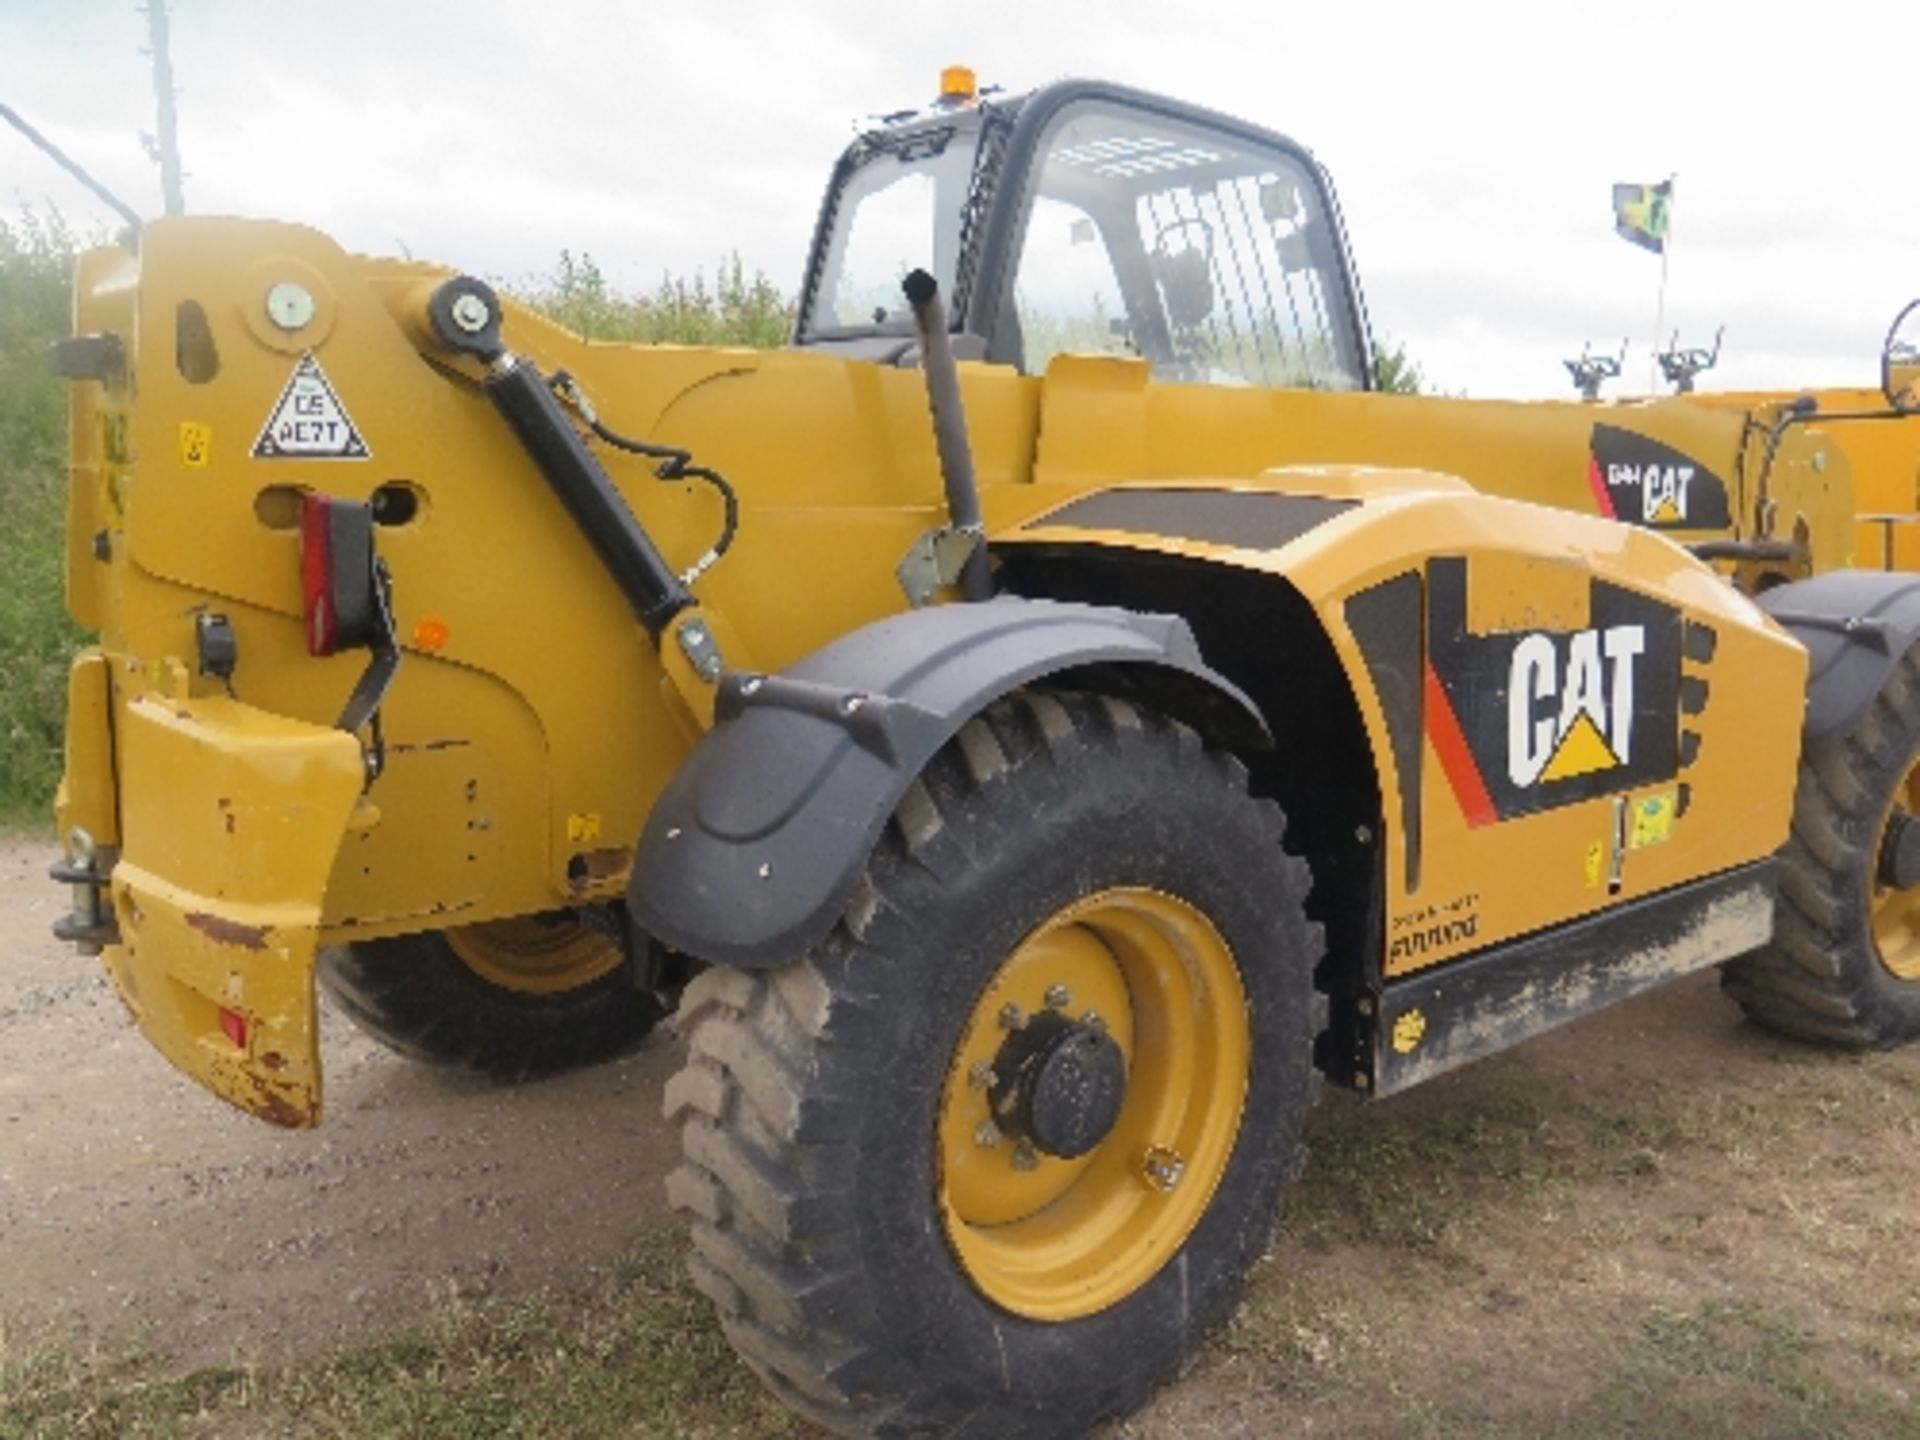 Caterpillar TH414STD telehandler 2680 hrs 2011 TBZ00712
This lot is included by kind permission